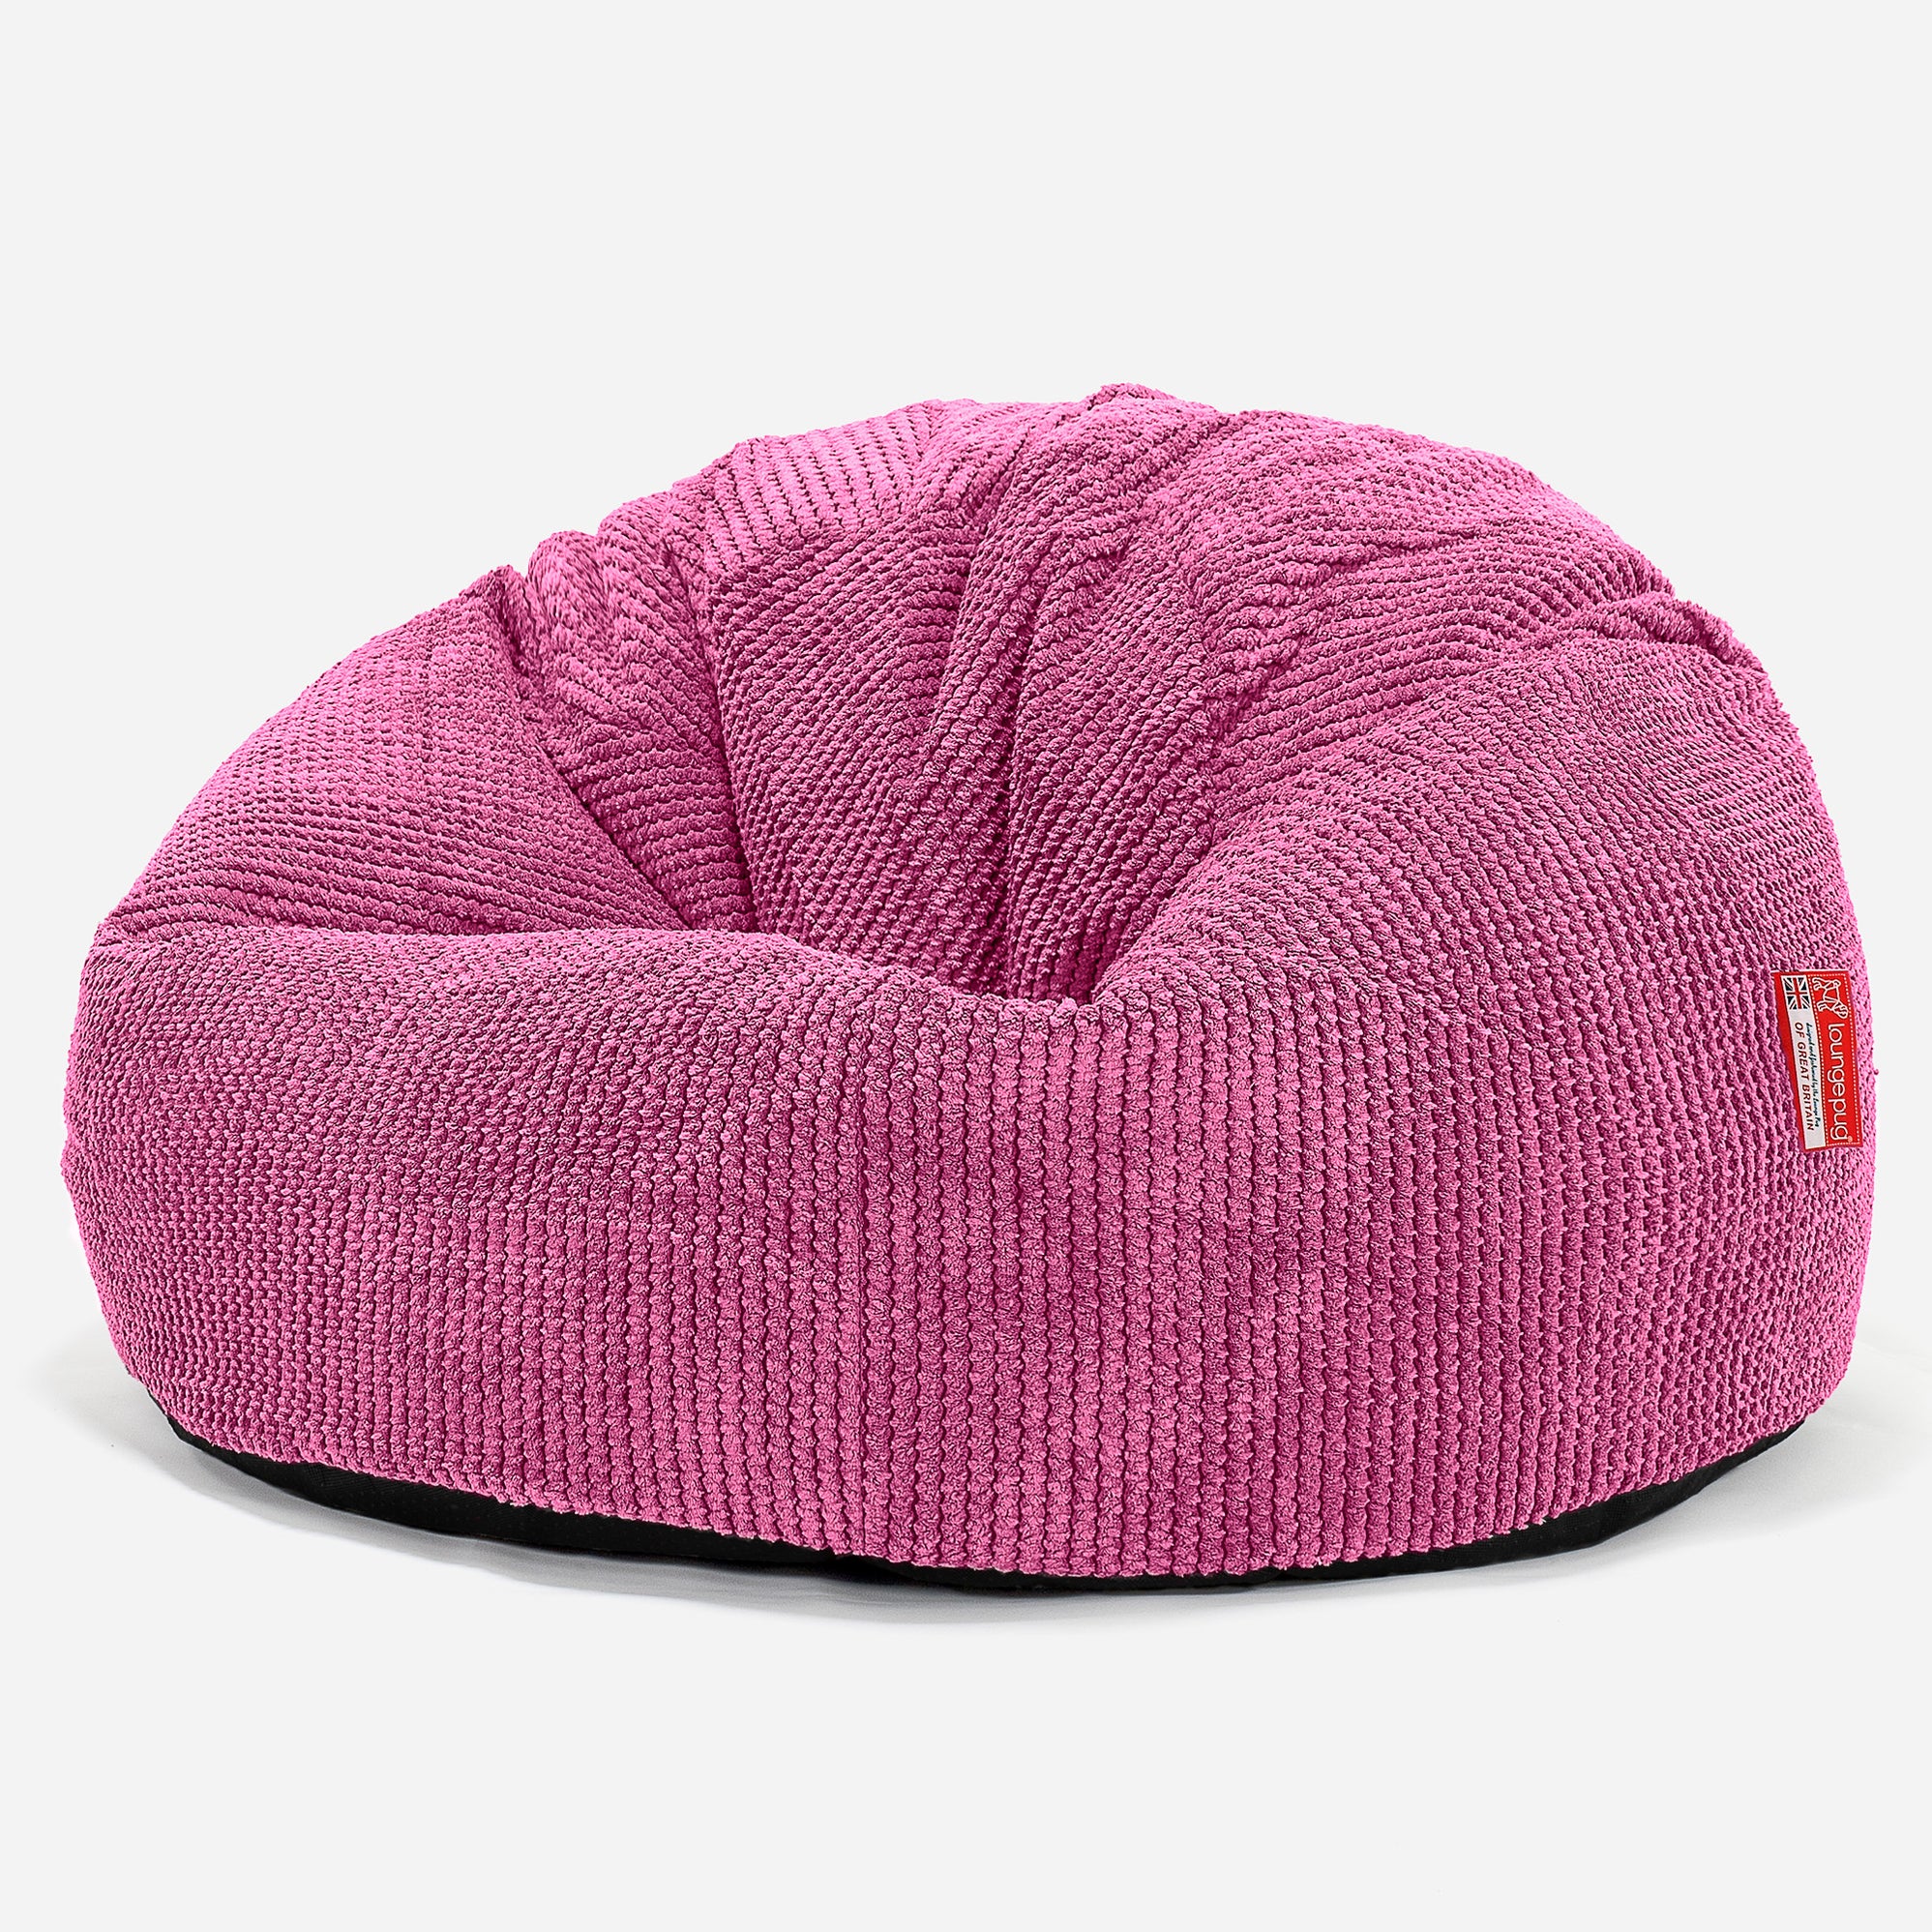 Lounge Pug Pom Pom Bean Bag Chairs Classic Gaming Chair Beanbags Pink ...